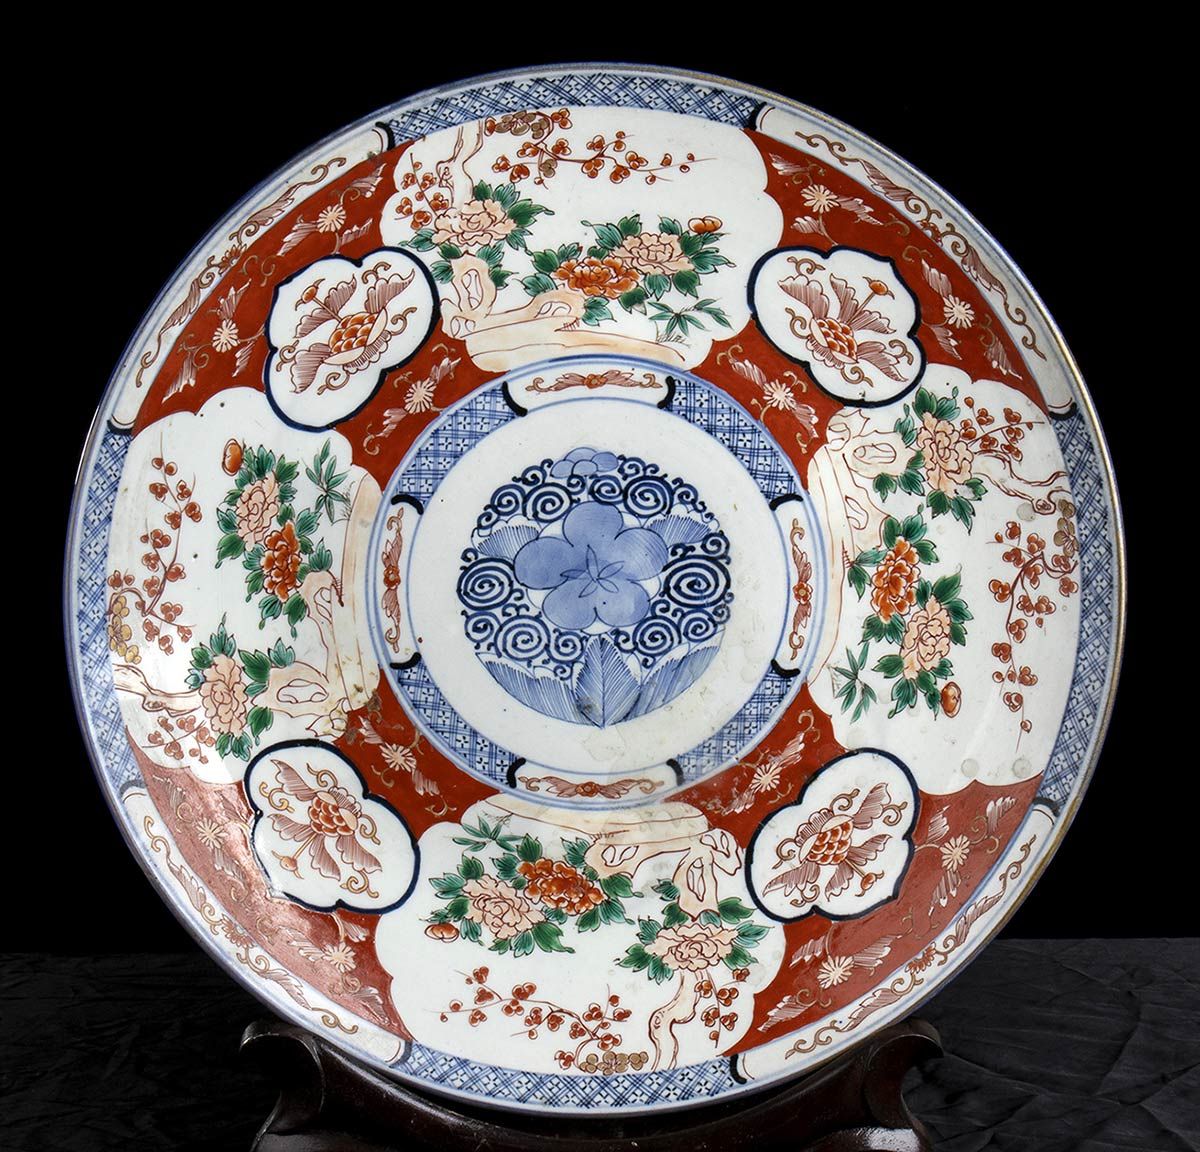 Null A LARGE 'IMARI' PORCELAIN DISH
Japan, Meiji period

Decorated with floral c&hellip;